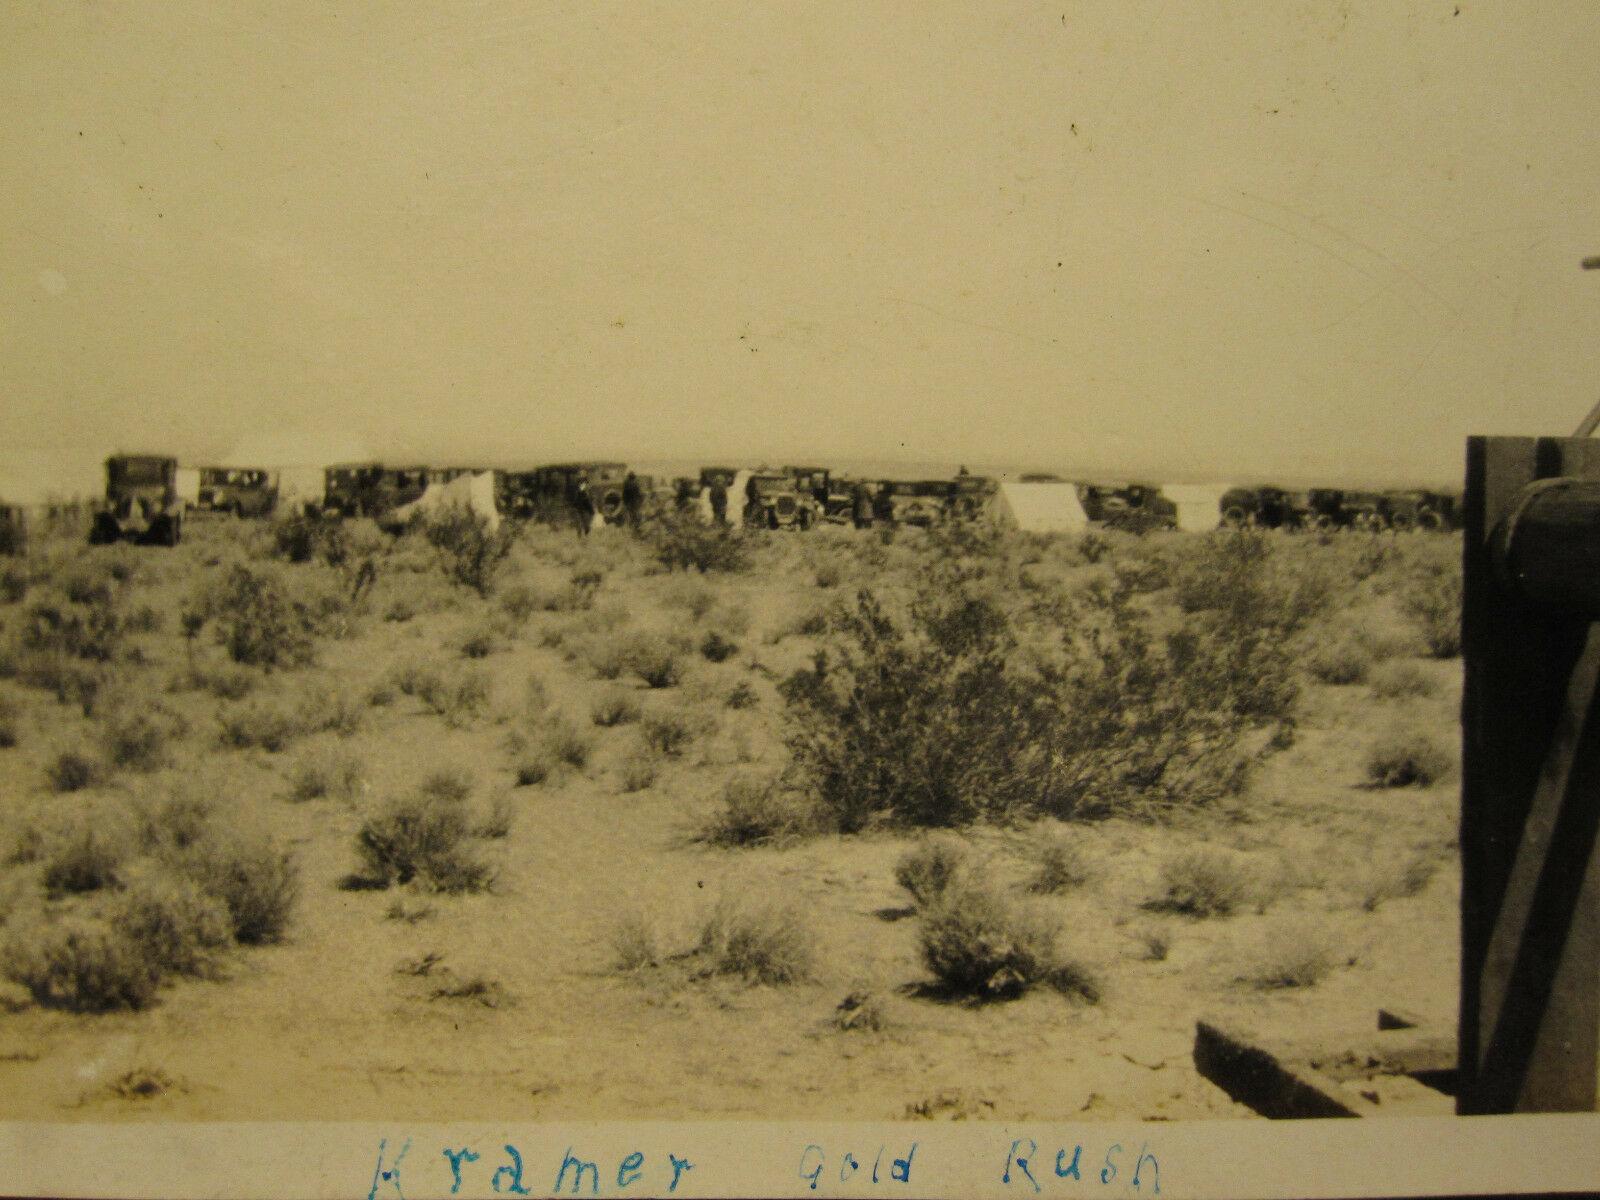 ANTIQUE 1920s CALIFORNIA GOLD RUSH MOJAVE DESERT KRAMER JUNCTION CA SALE (1950) Signed by Author(s) Photograph | 21 East